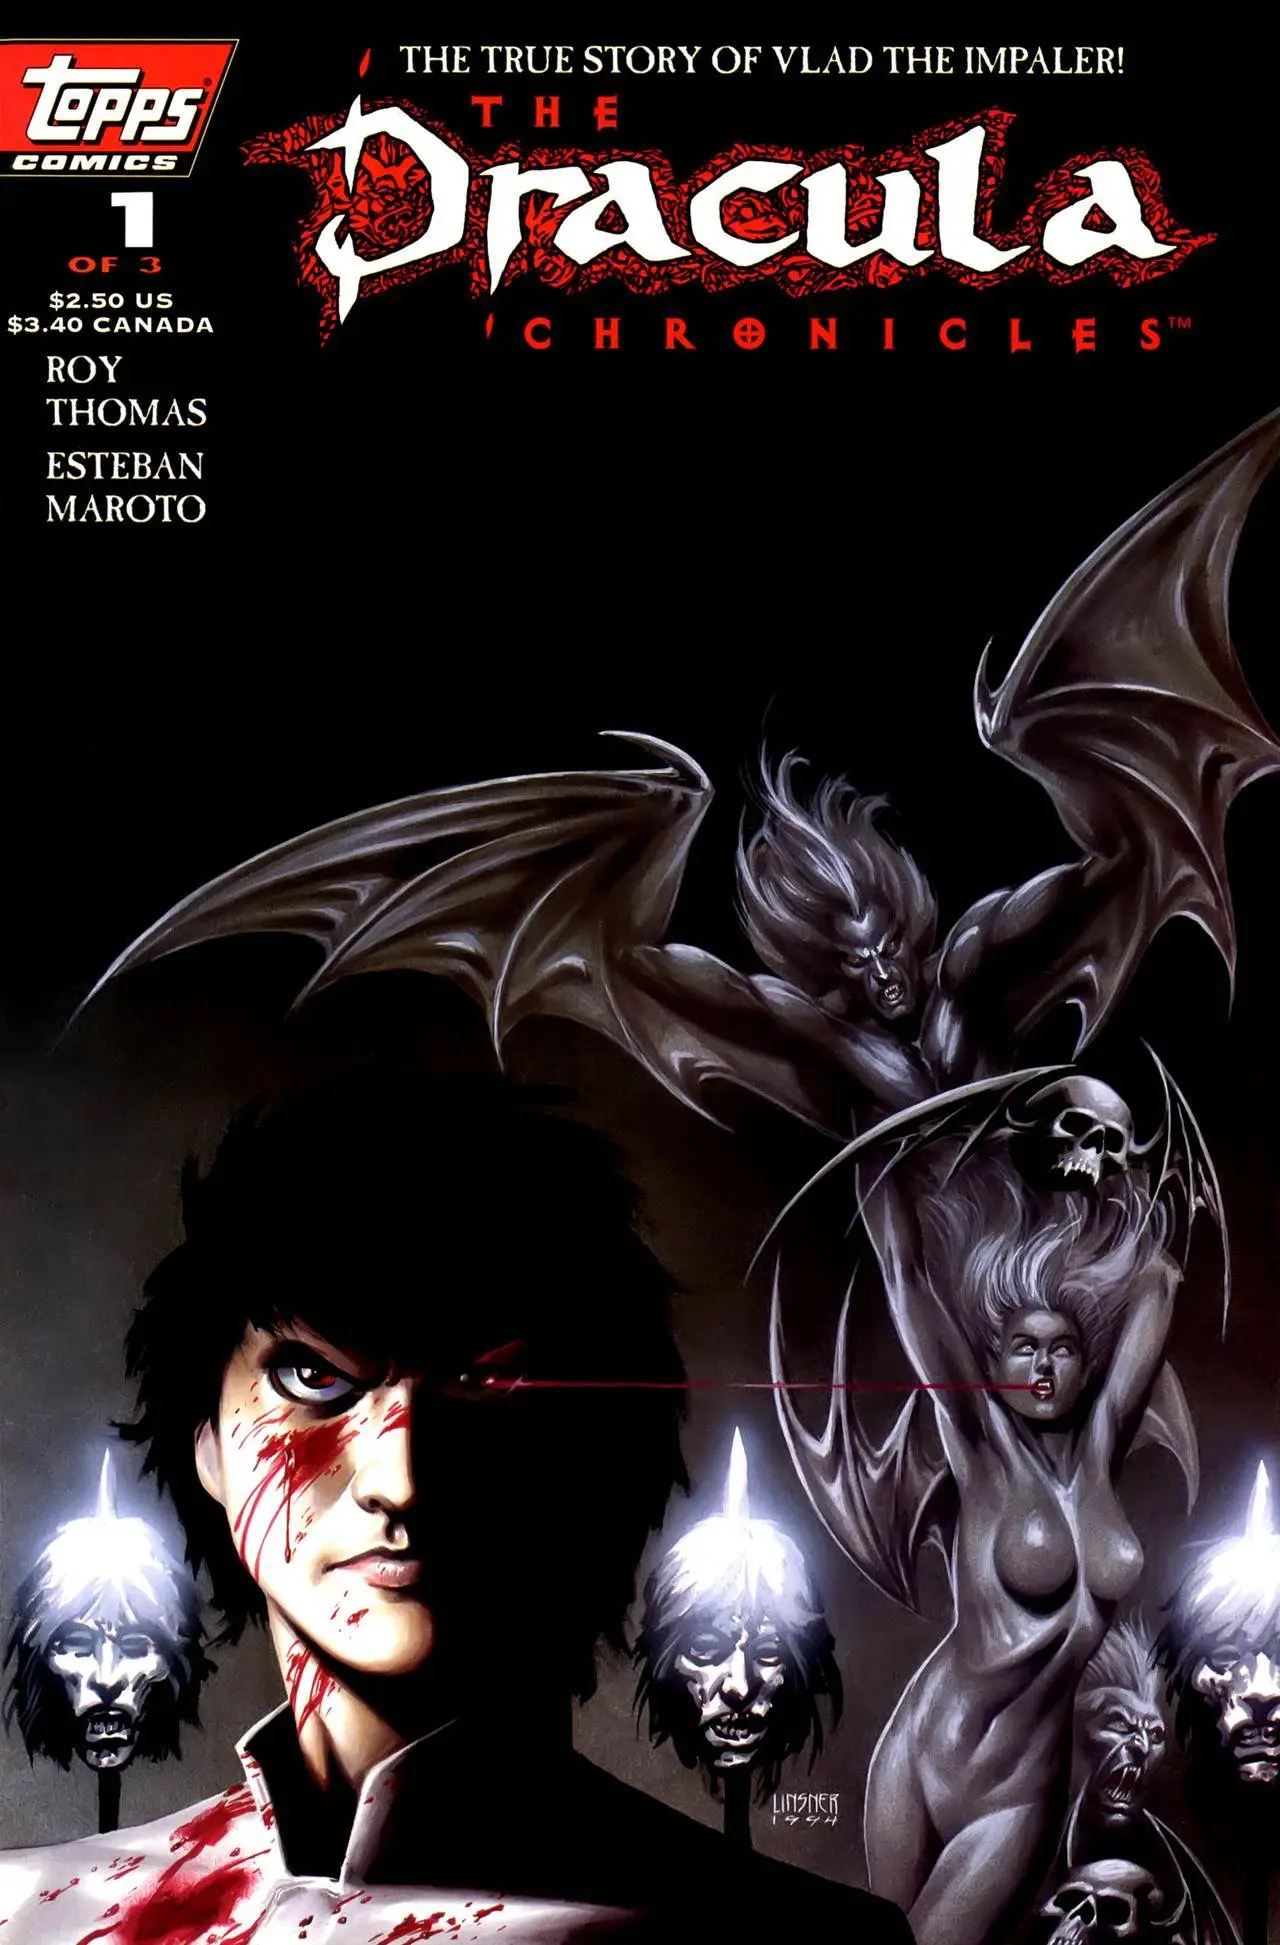 The Dracula Chronicles 01of 03 1995 2 Covers Dracula - Vlad the Impaler Reprint